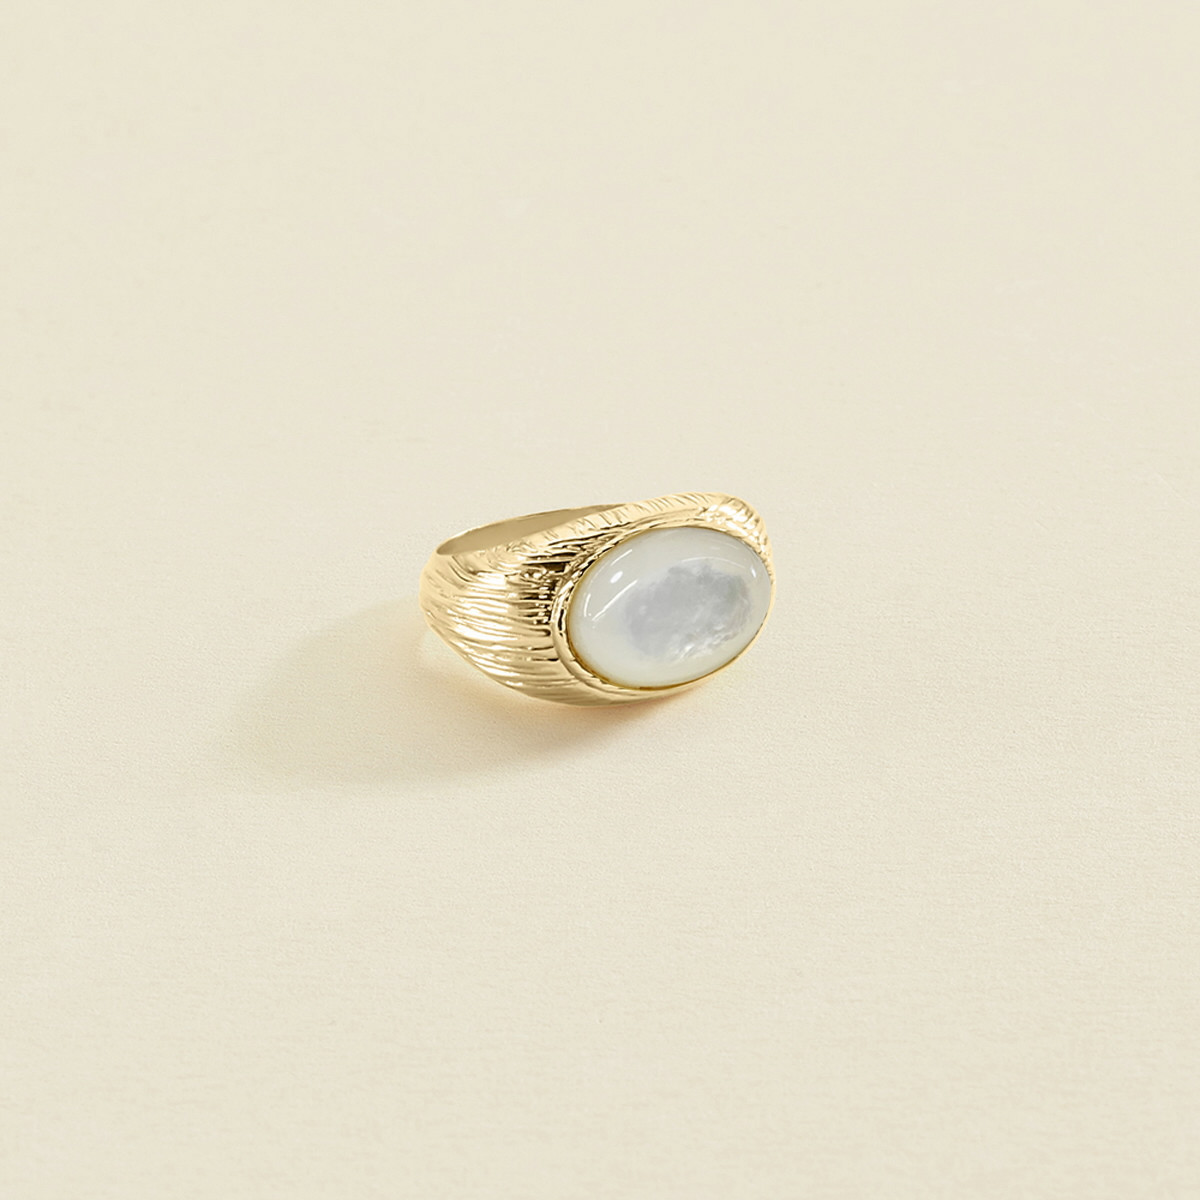 WIDE PETRA RING - MOTHER-OF-PEARL / GOLD